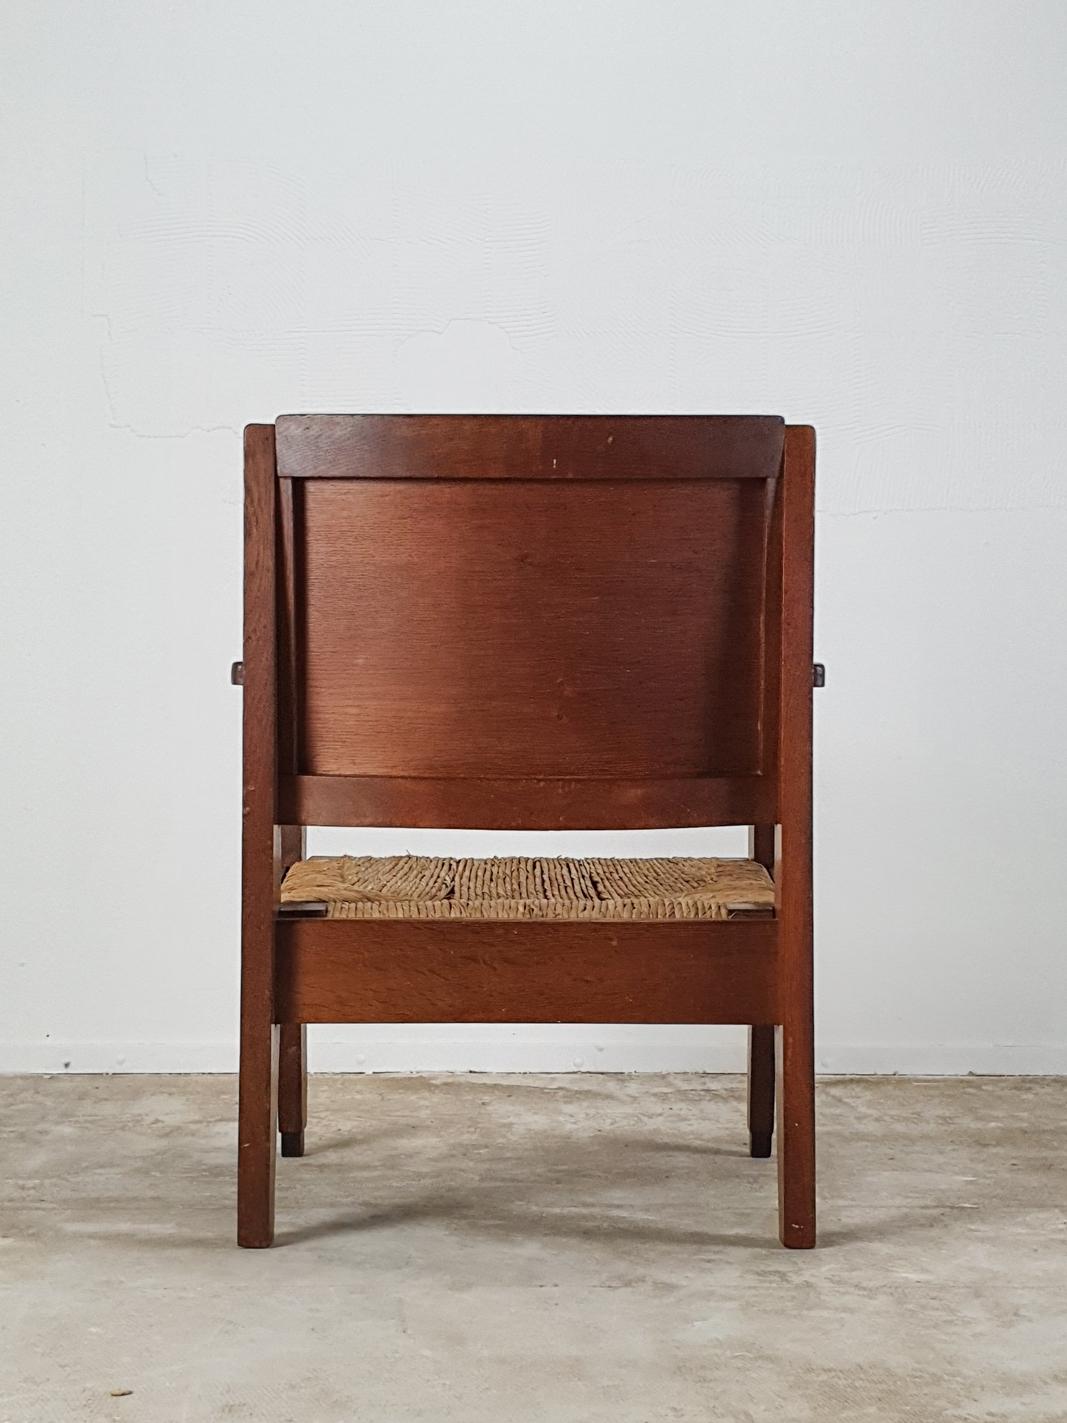 Mid-20th Century Low Chair by Frits Spanjaard 'Attributed'